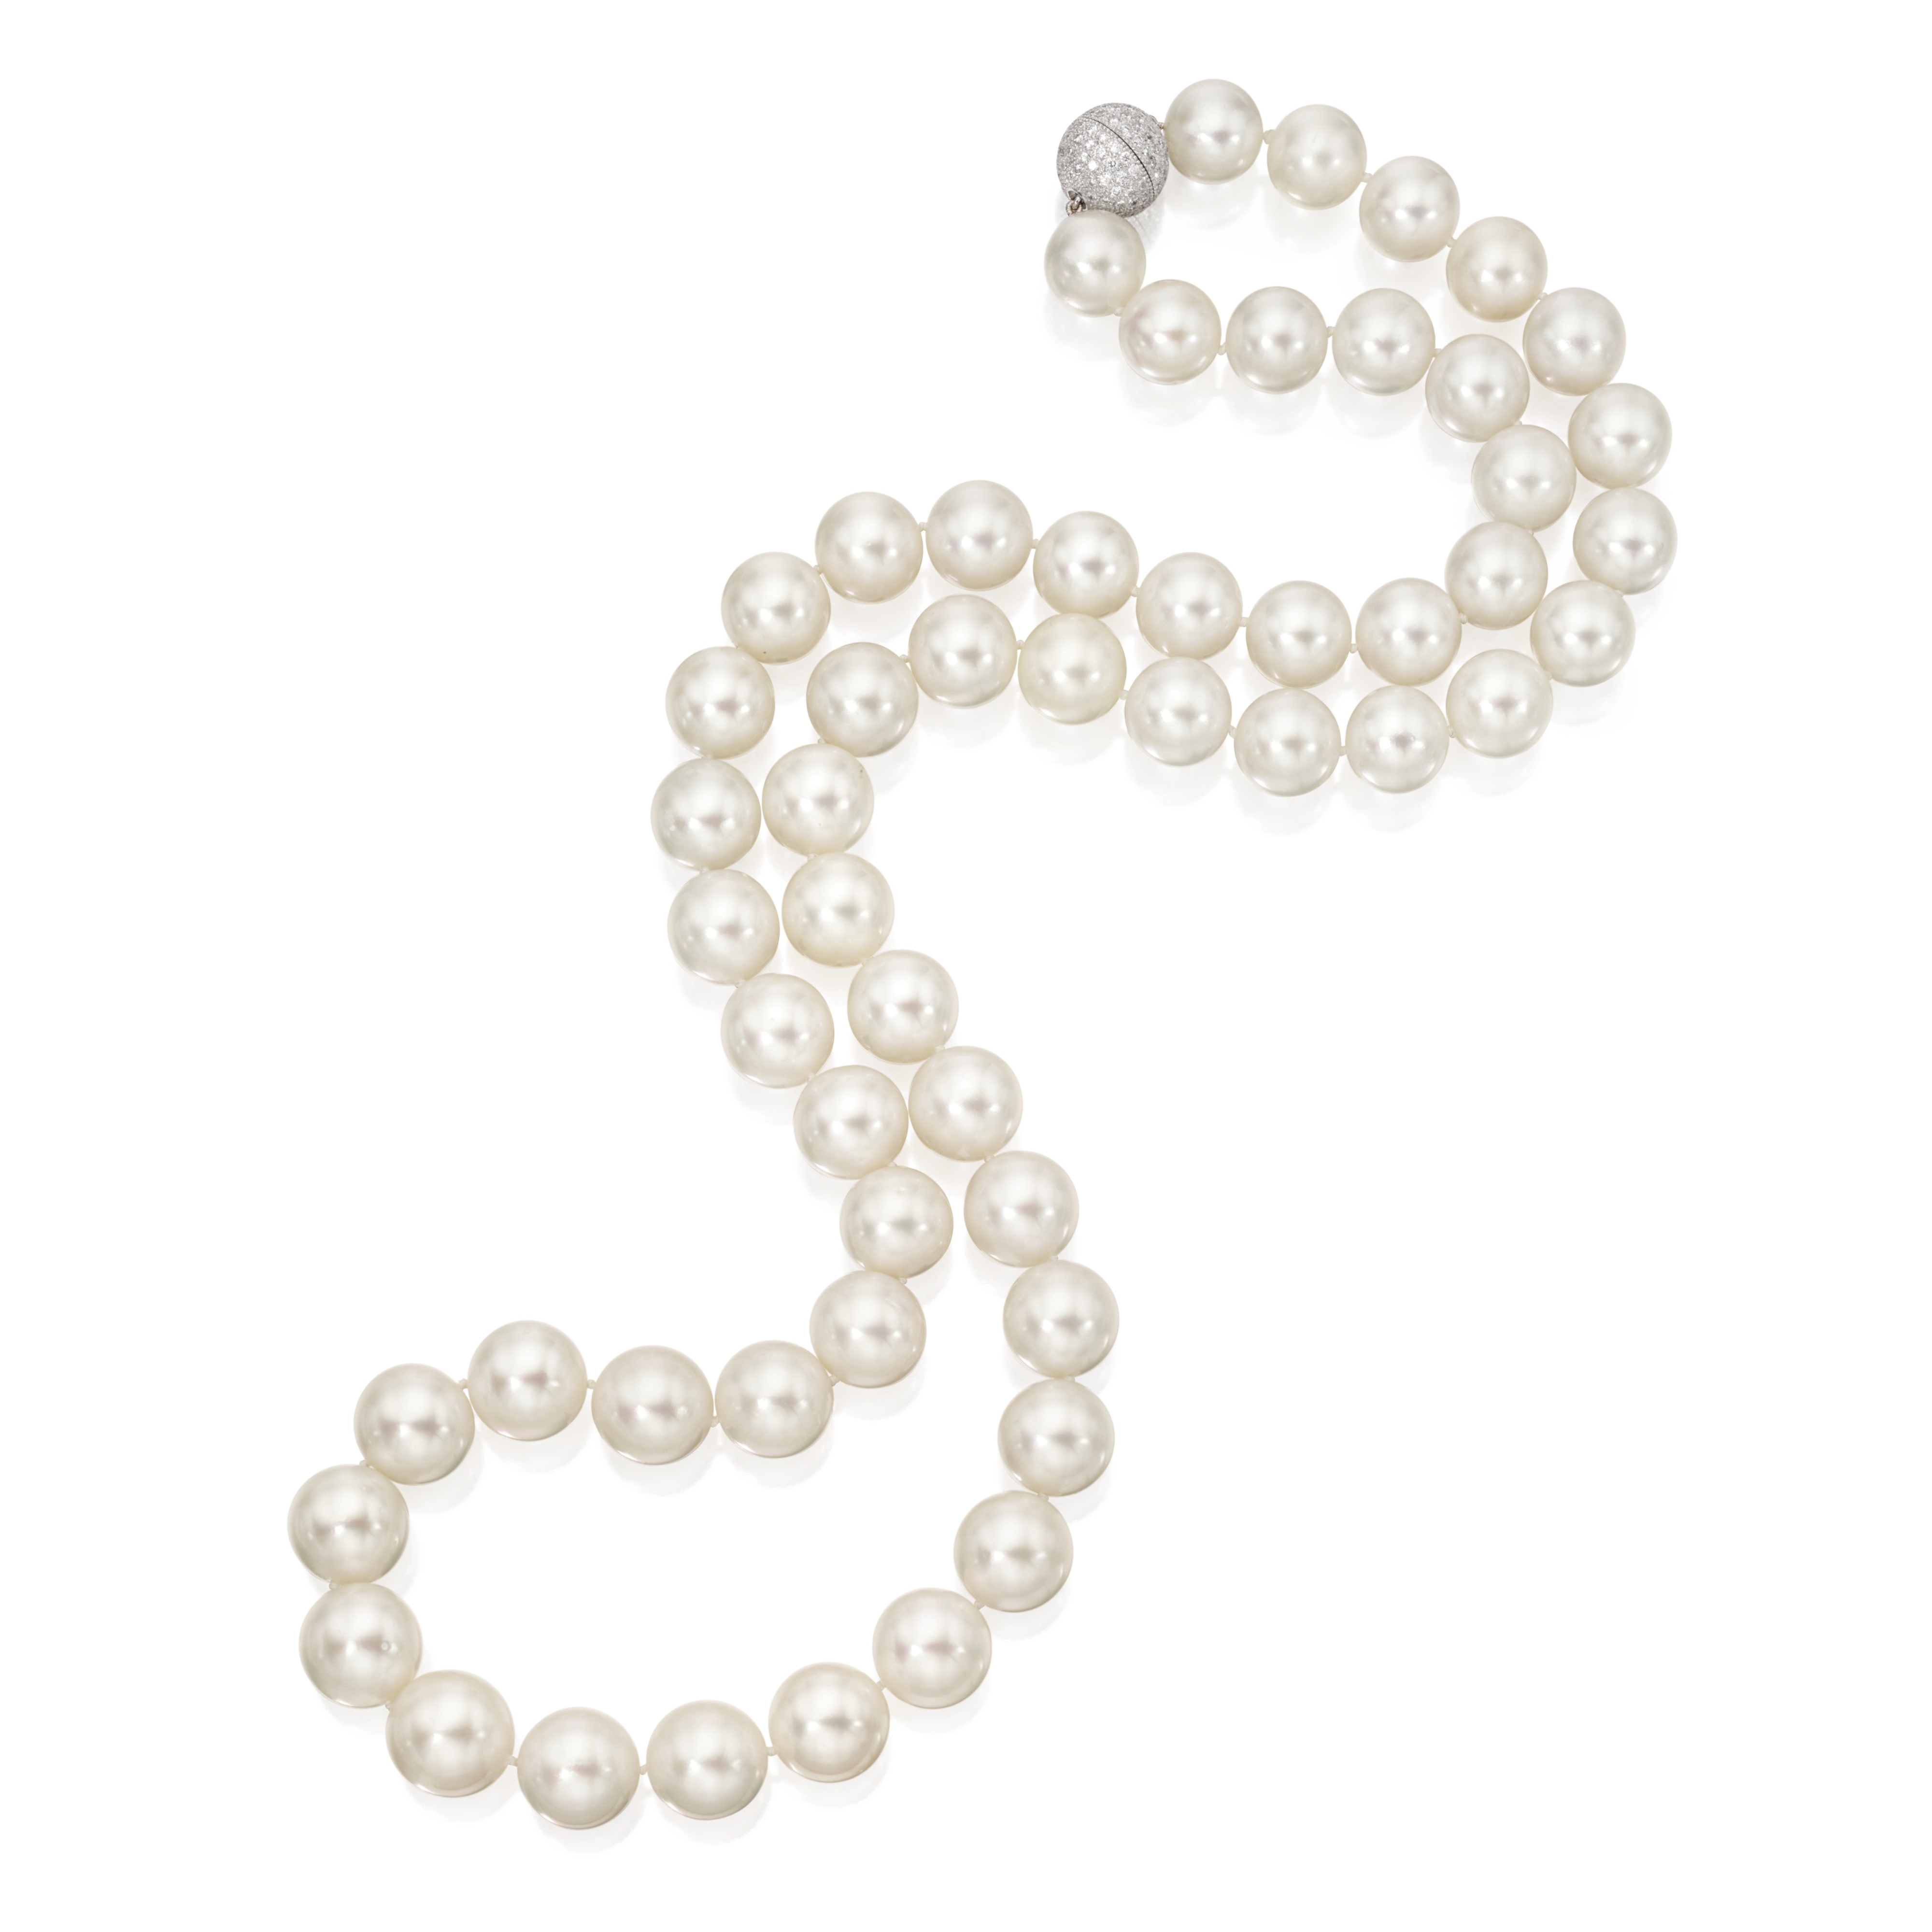 Pearls clipart pearl earring. Free string of png